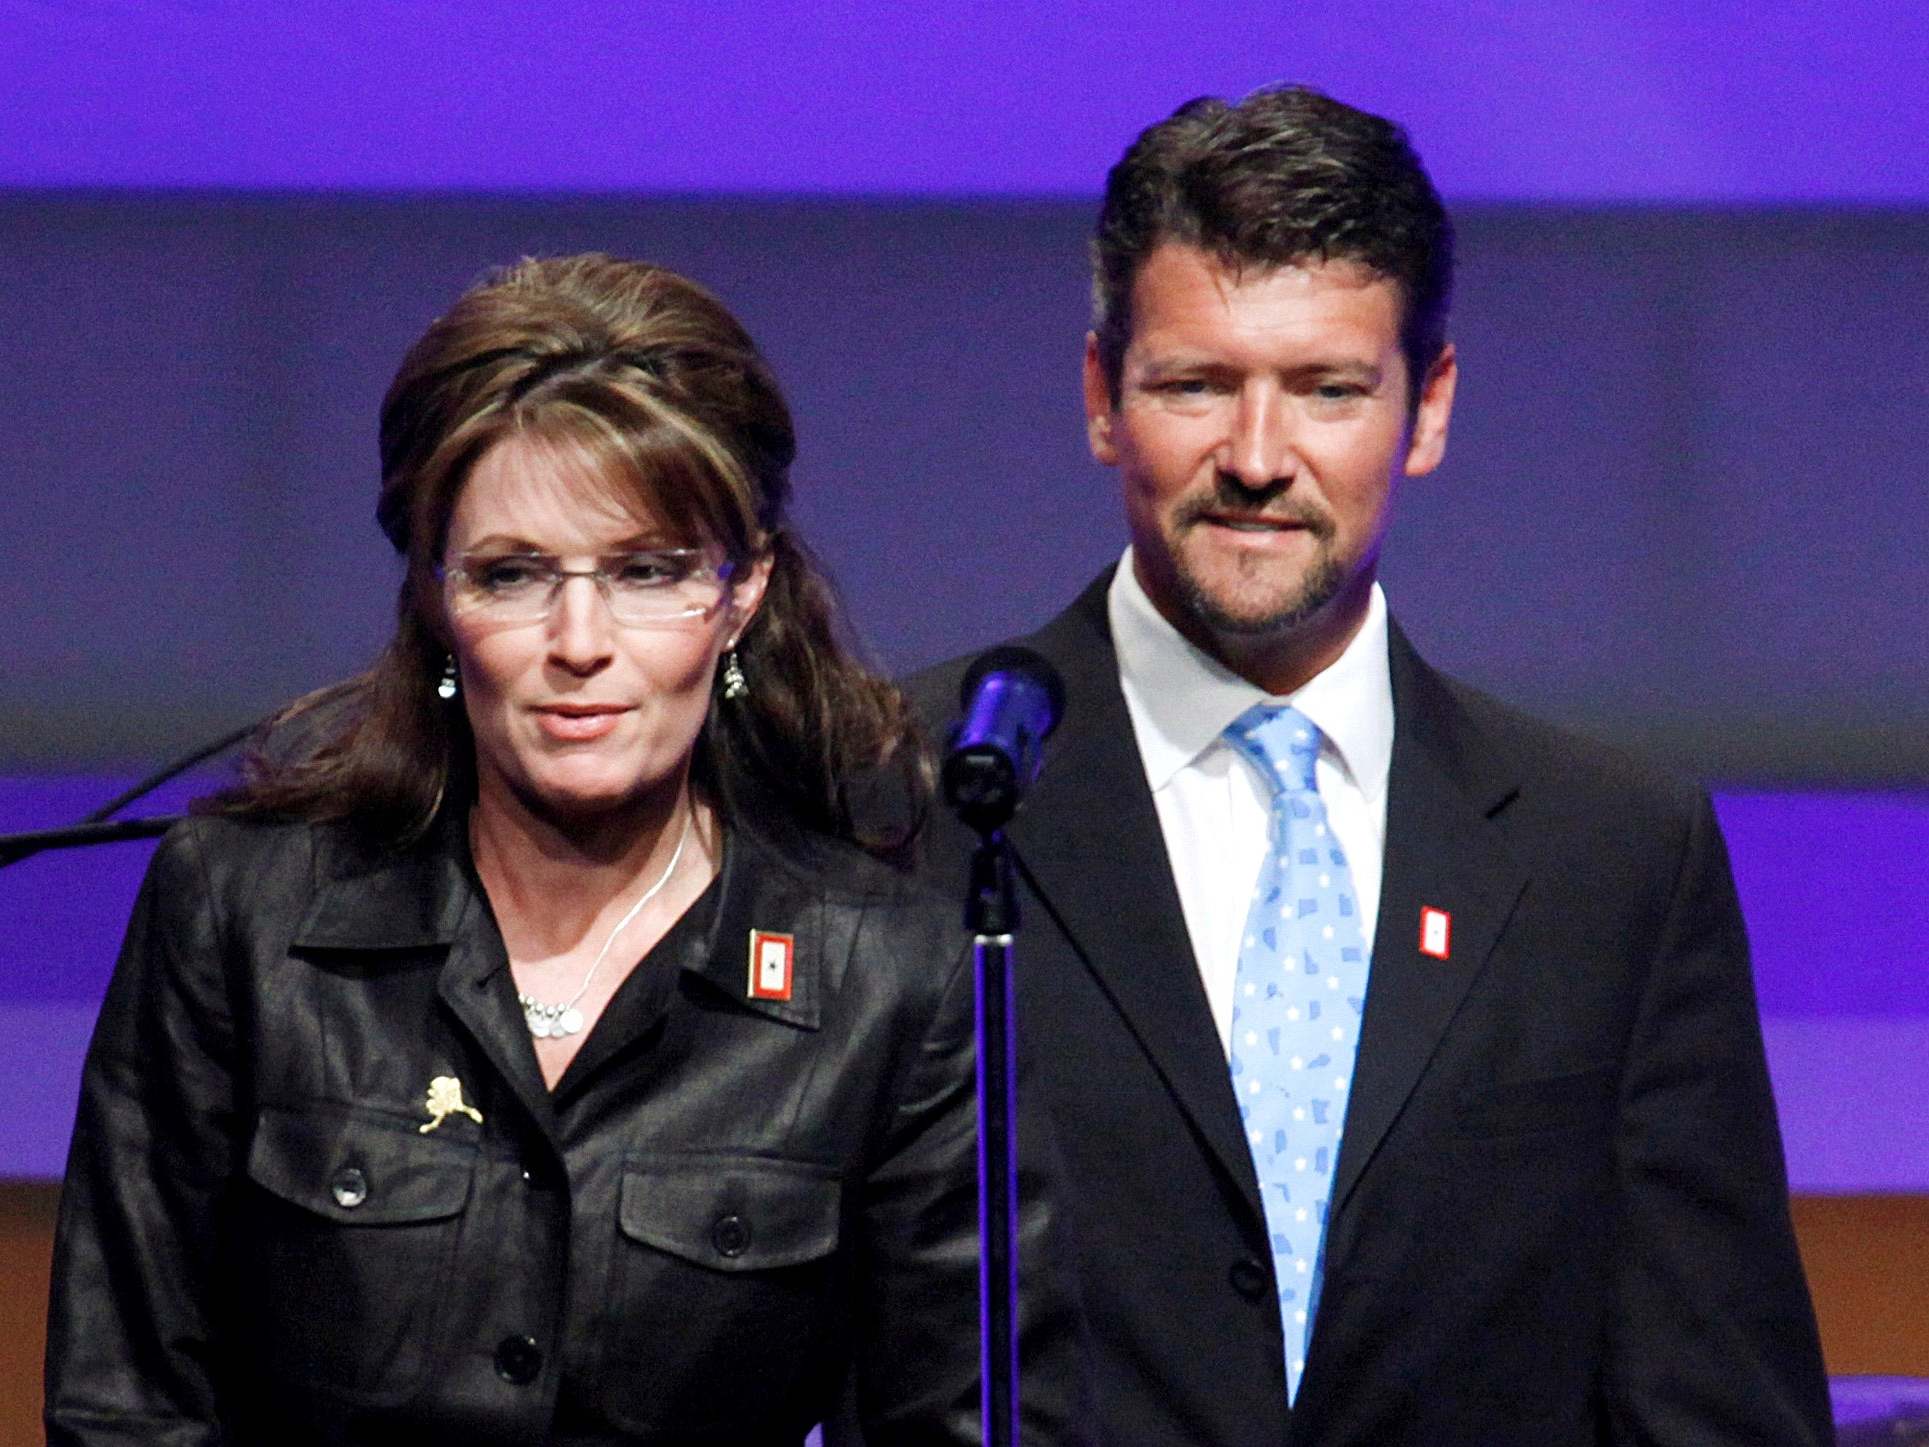 Court documents appear to show that the husband of former Alaska governor and 2008 Republican vice presidential nominee Sarah Palin is seeking a divorce.